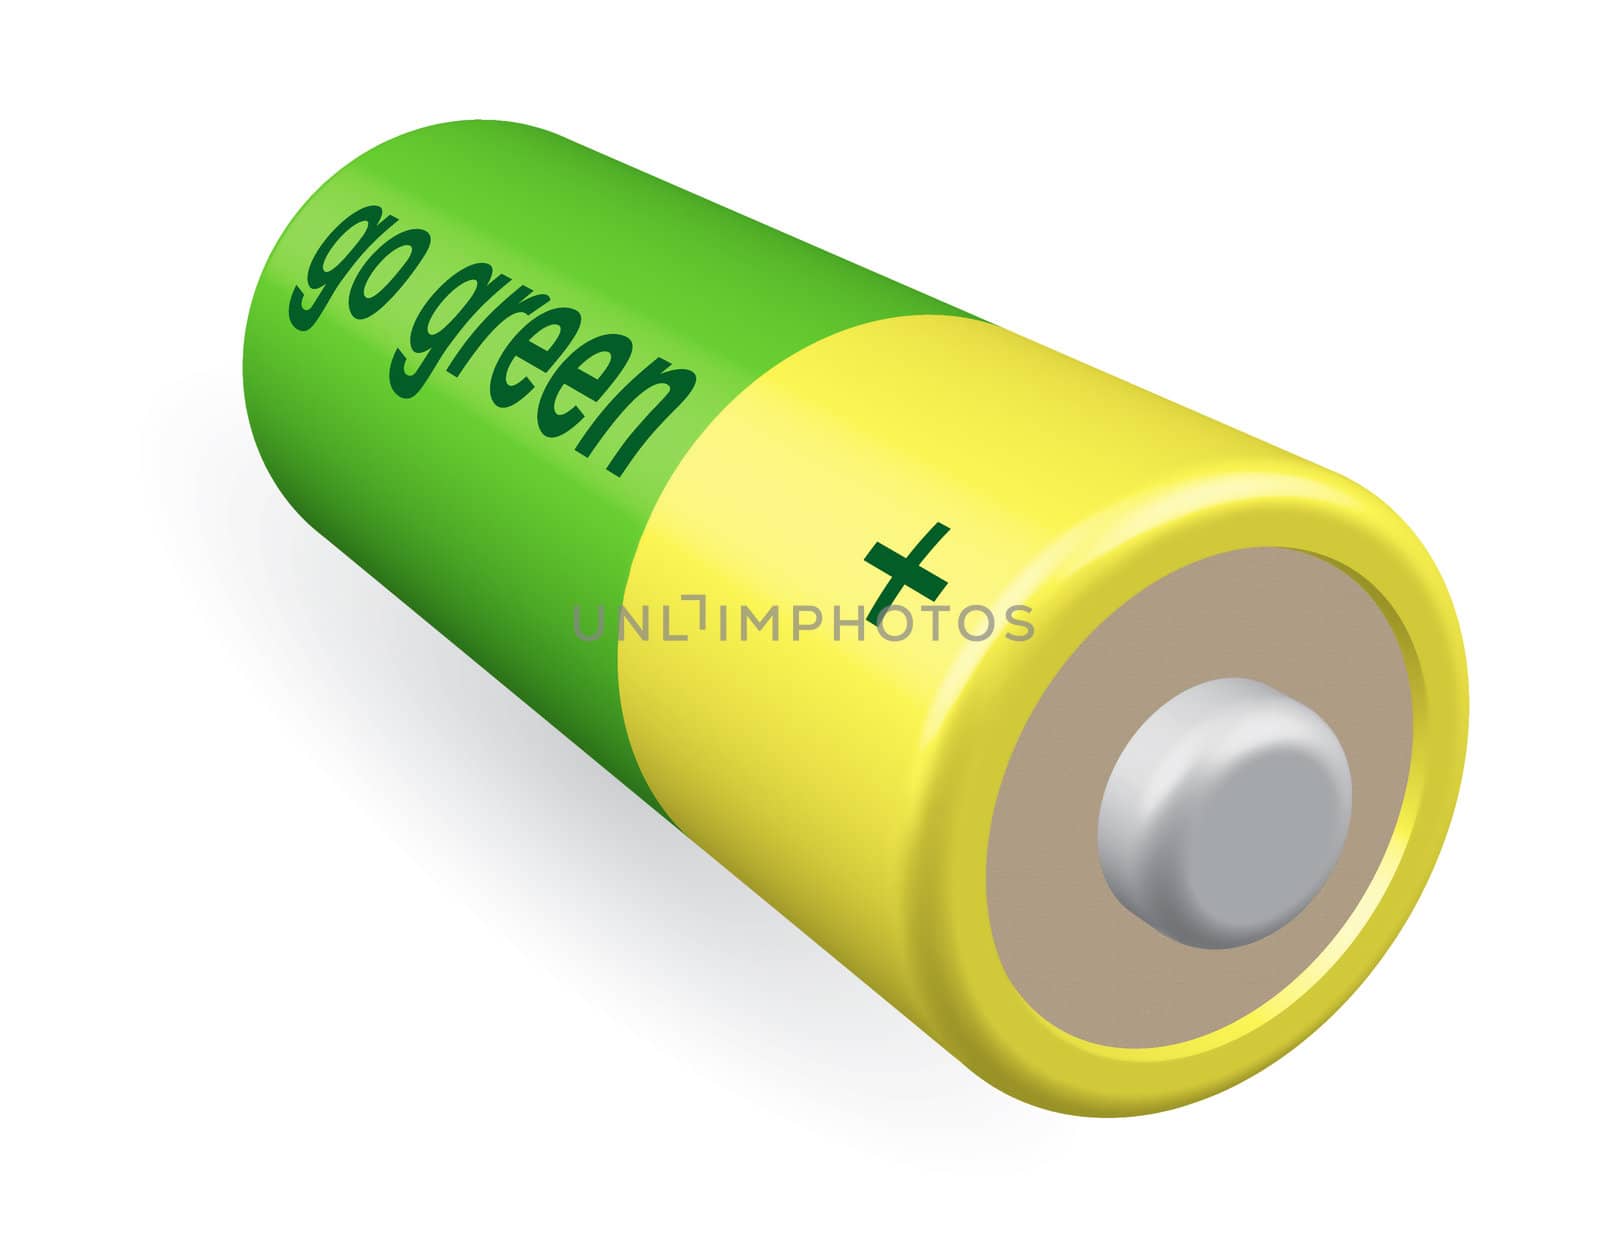 Battery with subscription GO GREEN. Ecology concept illustration.